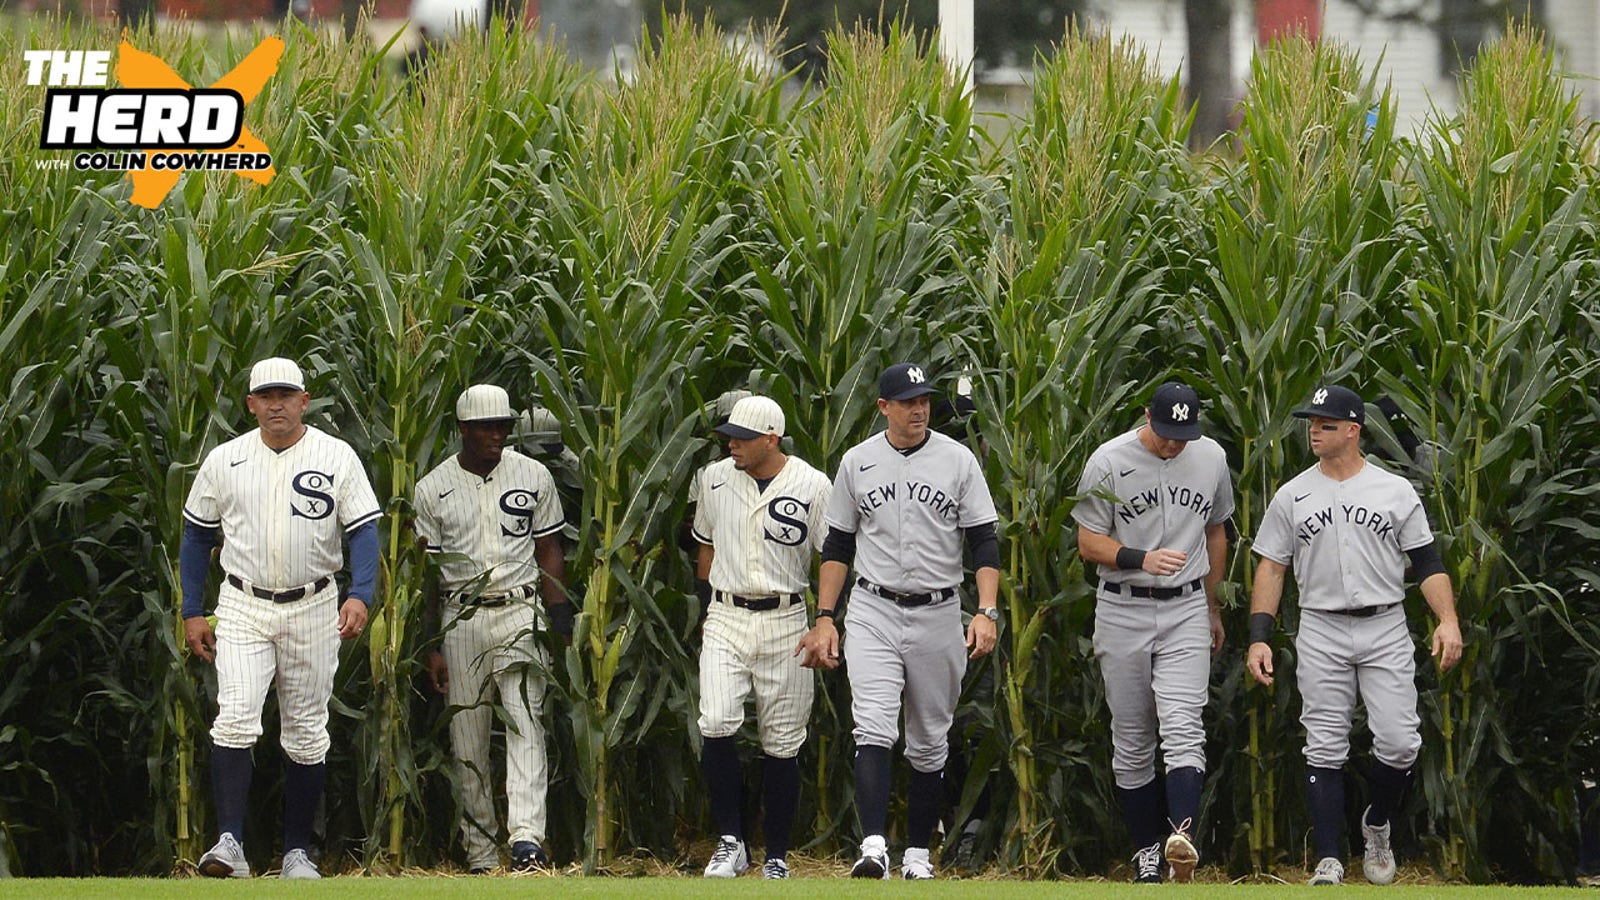 Colin Cowherd on what made the Field of Dreams Game so special